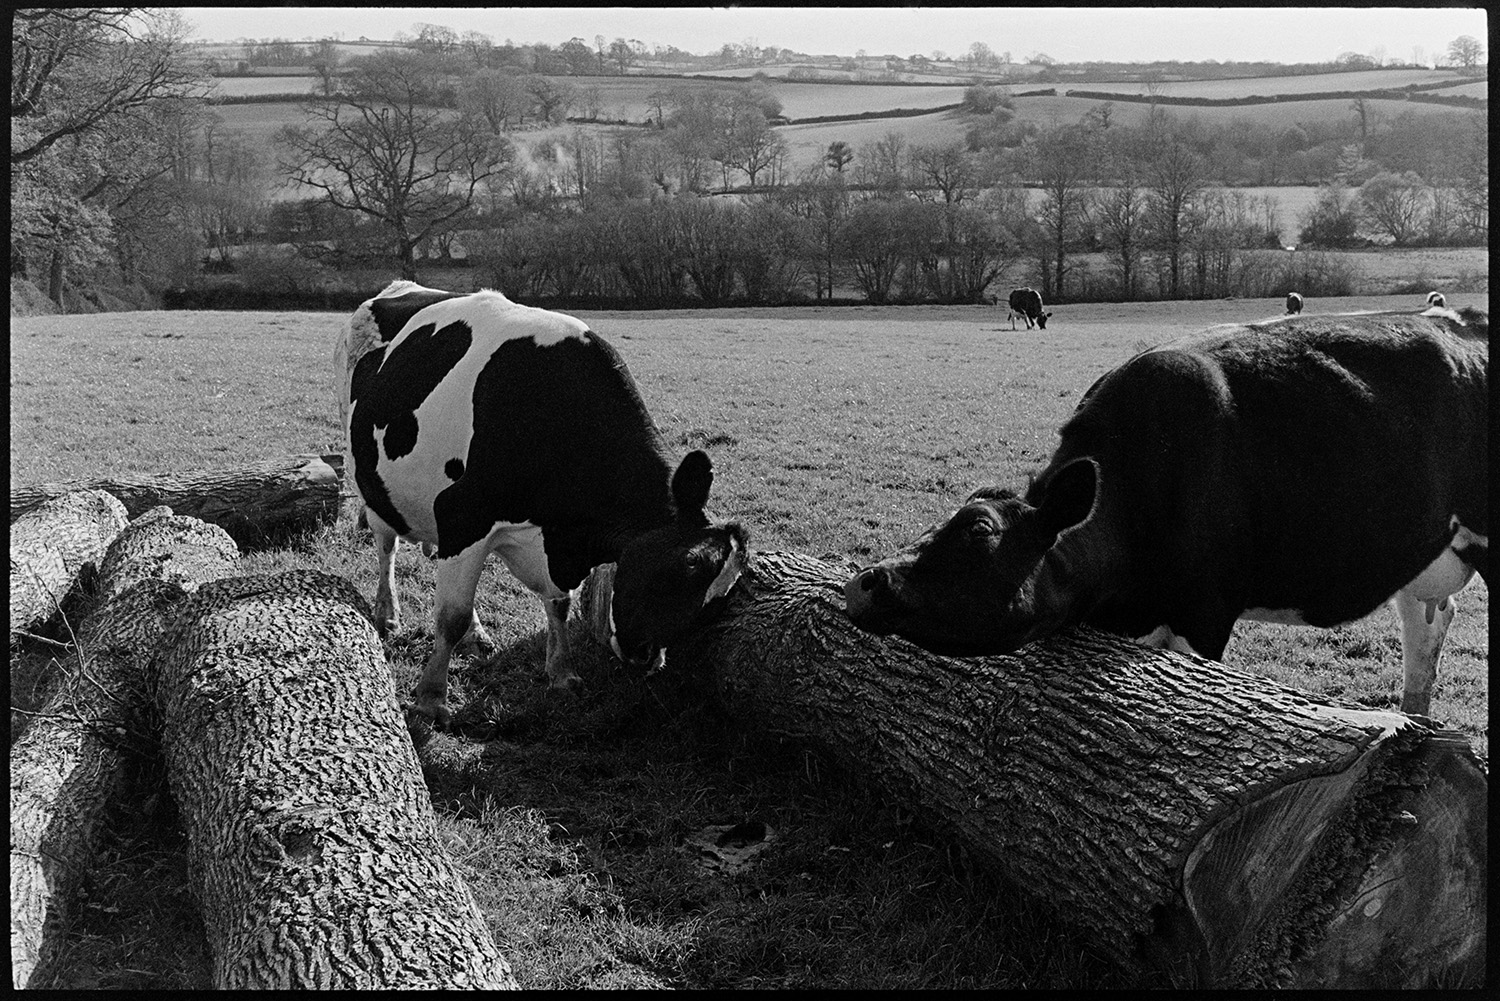 Cows, milking herd with elm trunks in field. 
[Two cows scratching against felled elm tree trunks in a field at Parsonage, Iddesleigh. Other cows can be seen grazing in the background, against a  countryside landscape of field and trees.]